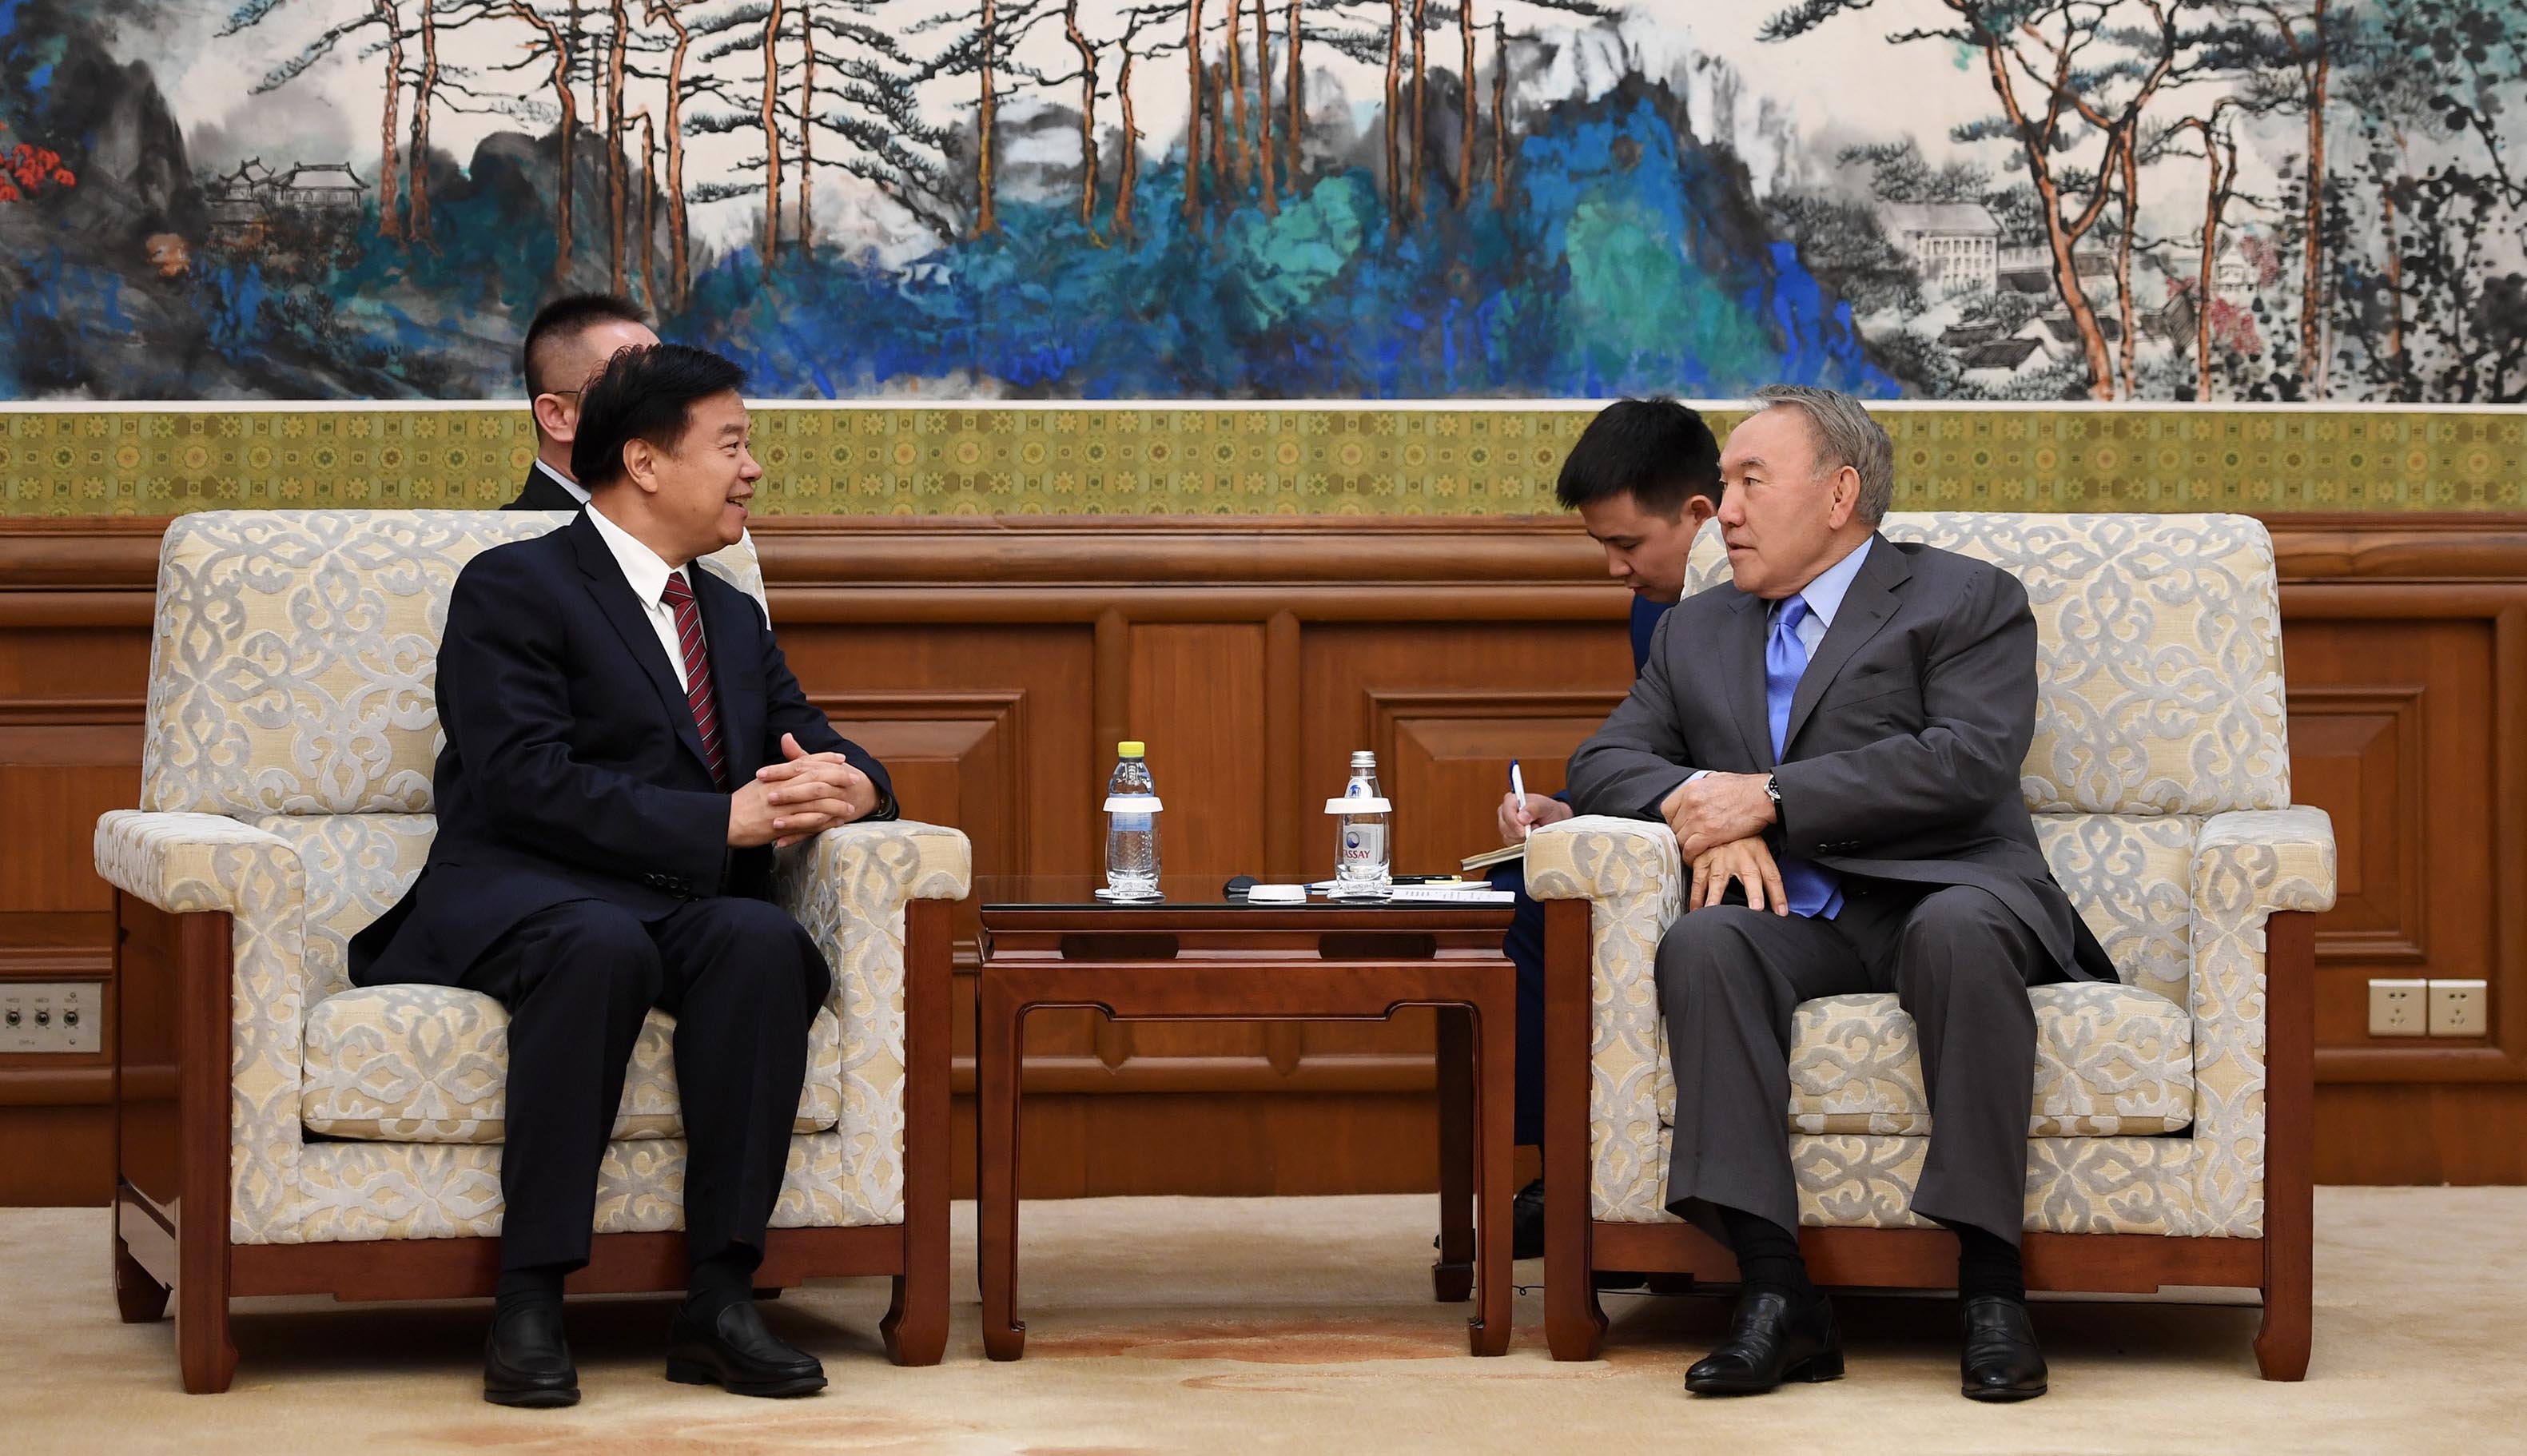 Kazakh President meets with Wang Yilin, Chairman of the Board of China National Petroleum Corporation